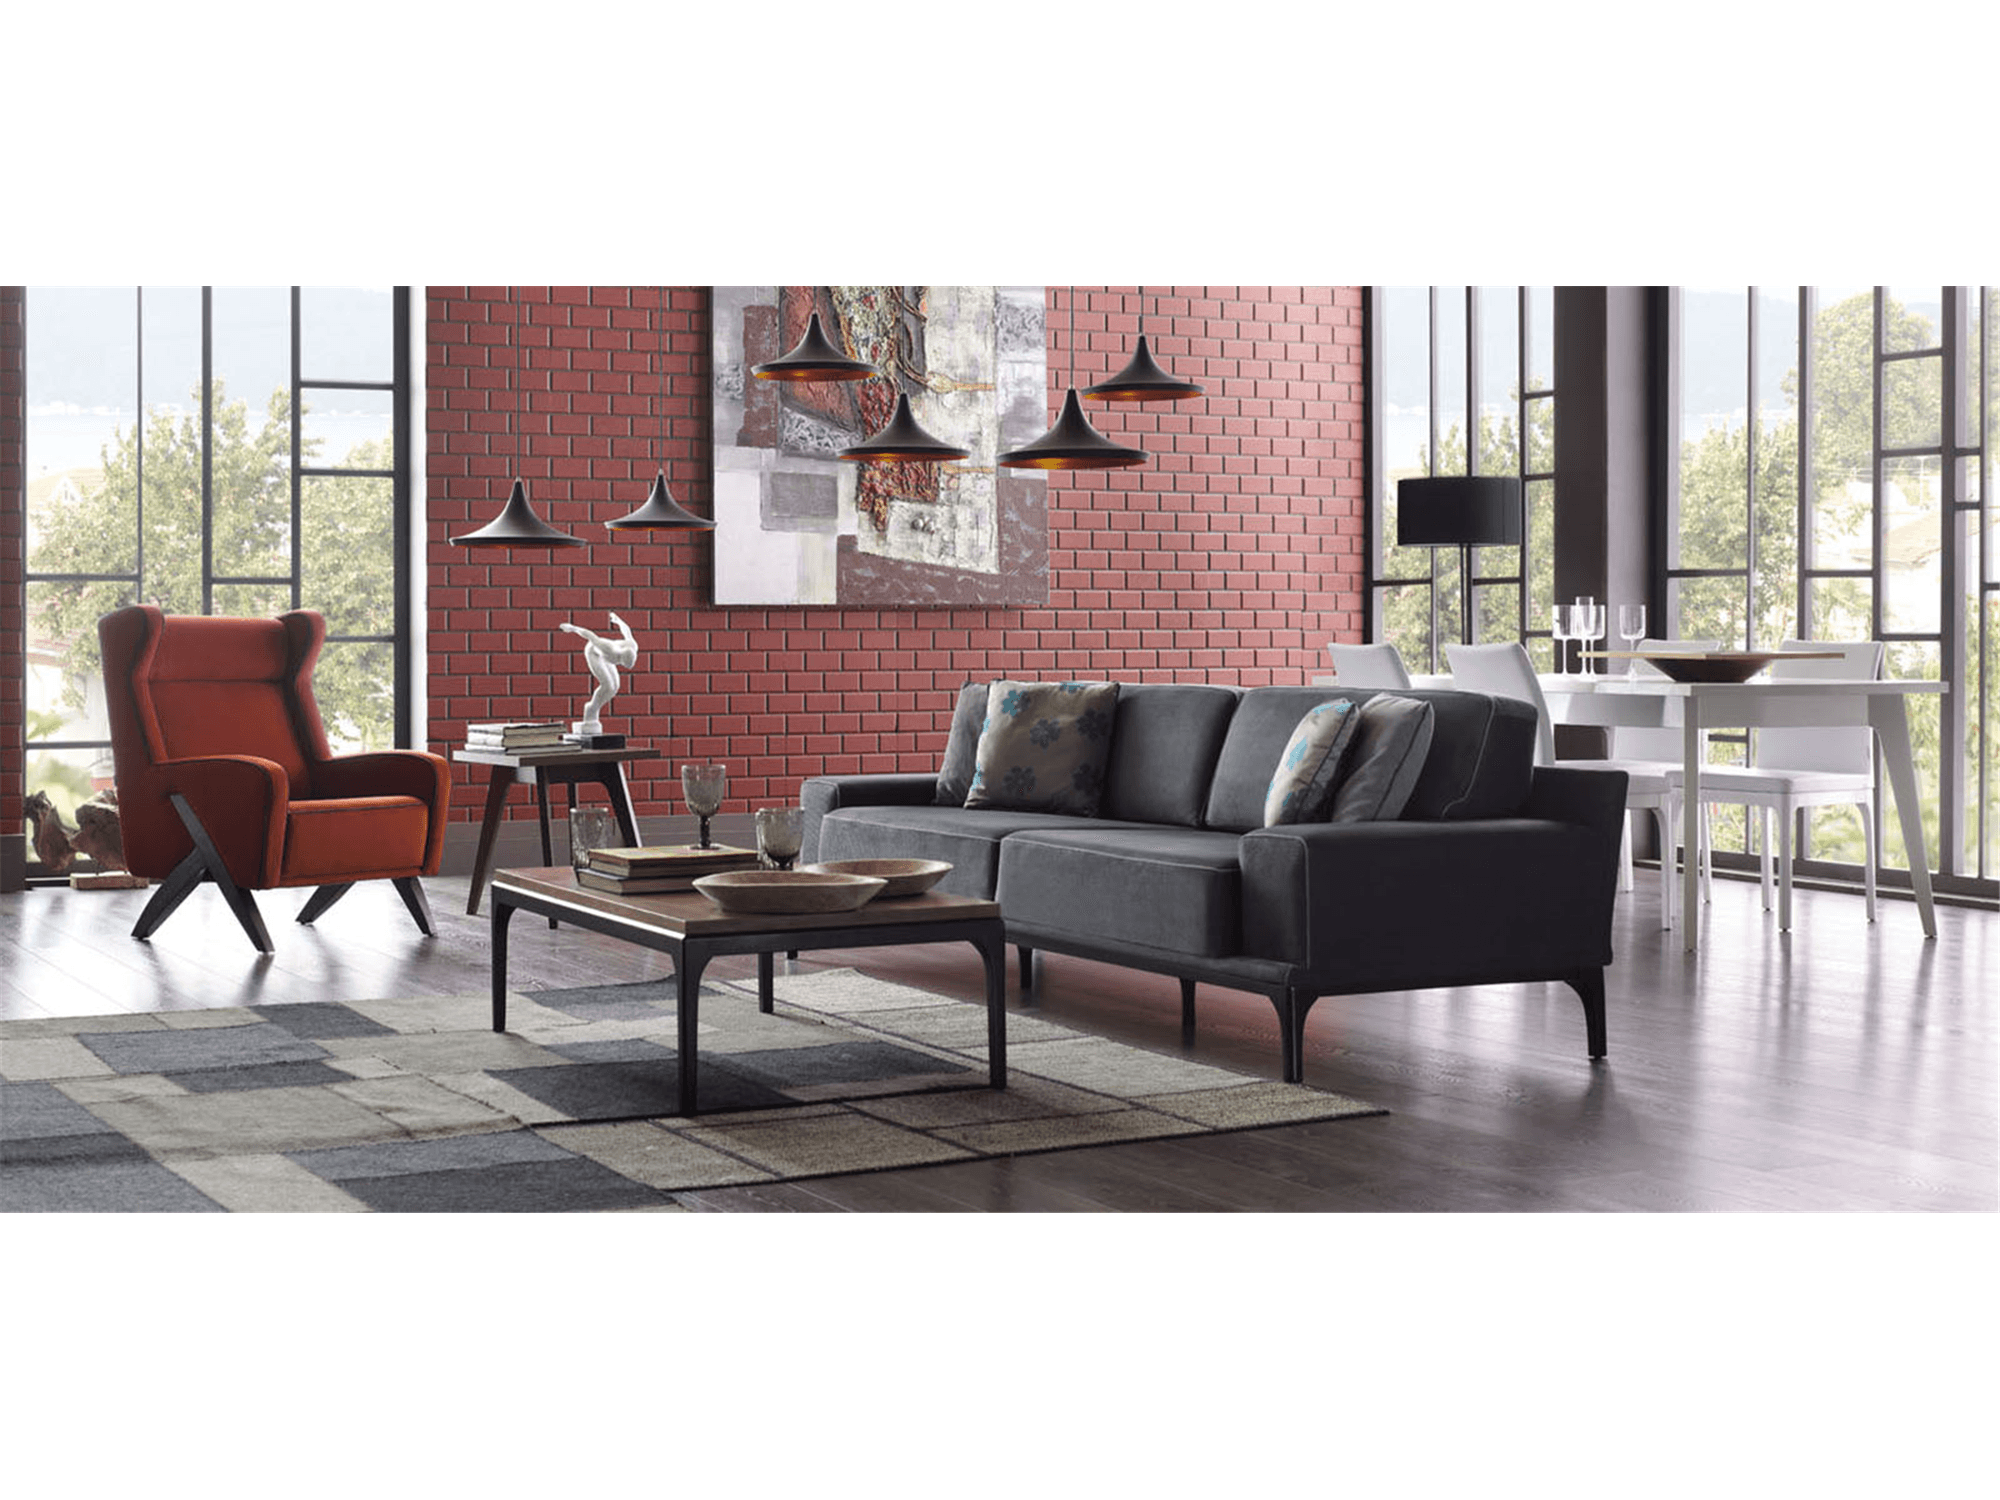 Krista Living Room Collection - Euro Living Furniture